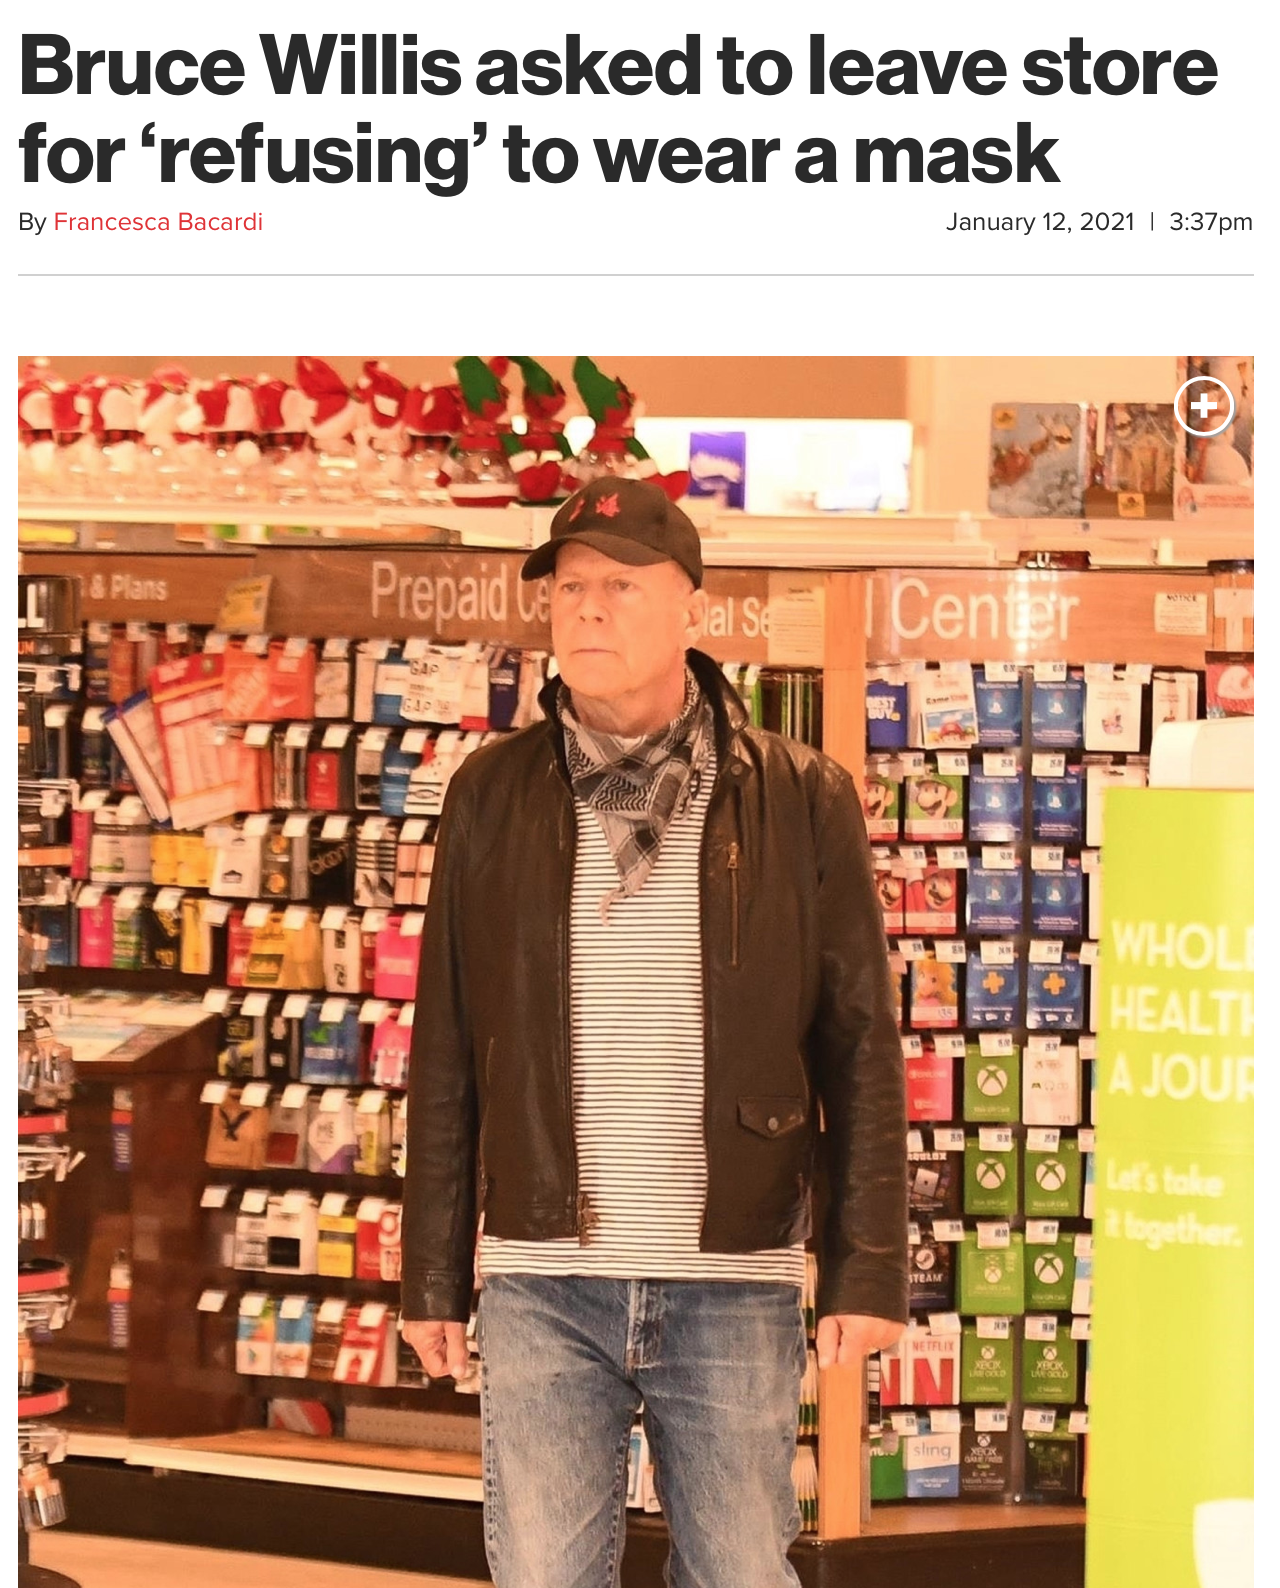 supermarket - Bruce Willis asked to leave store for 'refusing' to wear a mask By Francesca Bacardi 3.37pm Prepaid al S Cennet Whol Healt A Jou